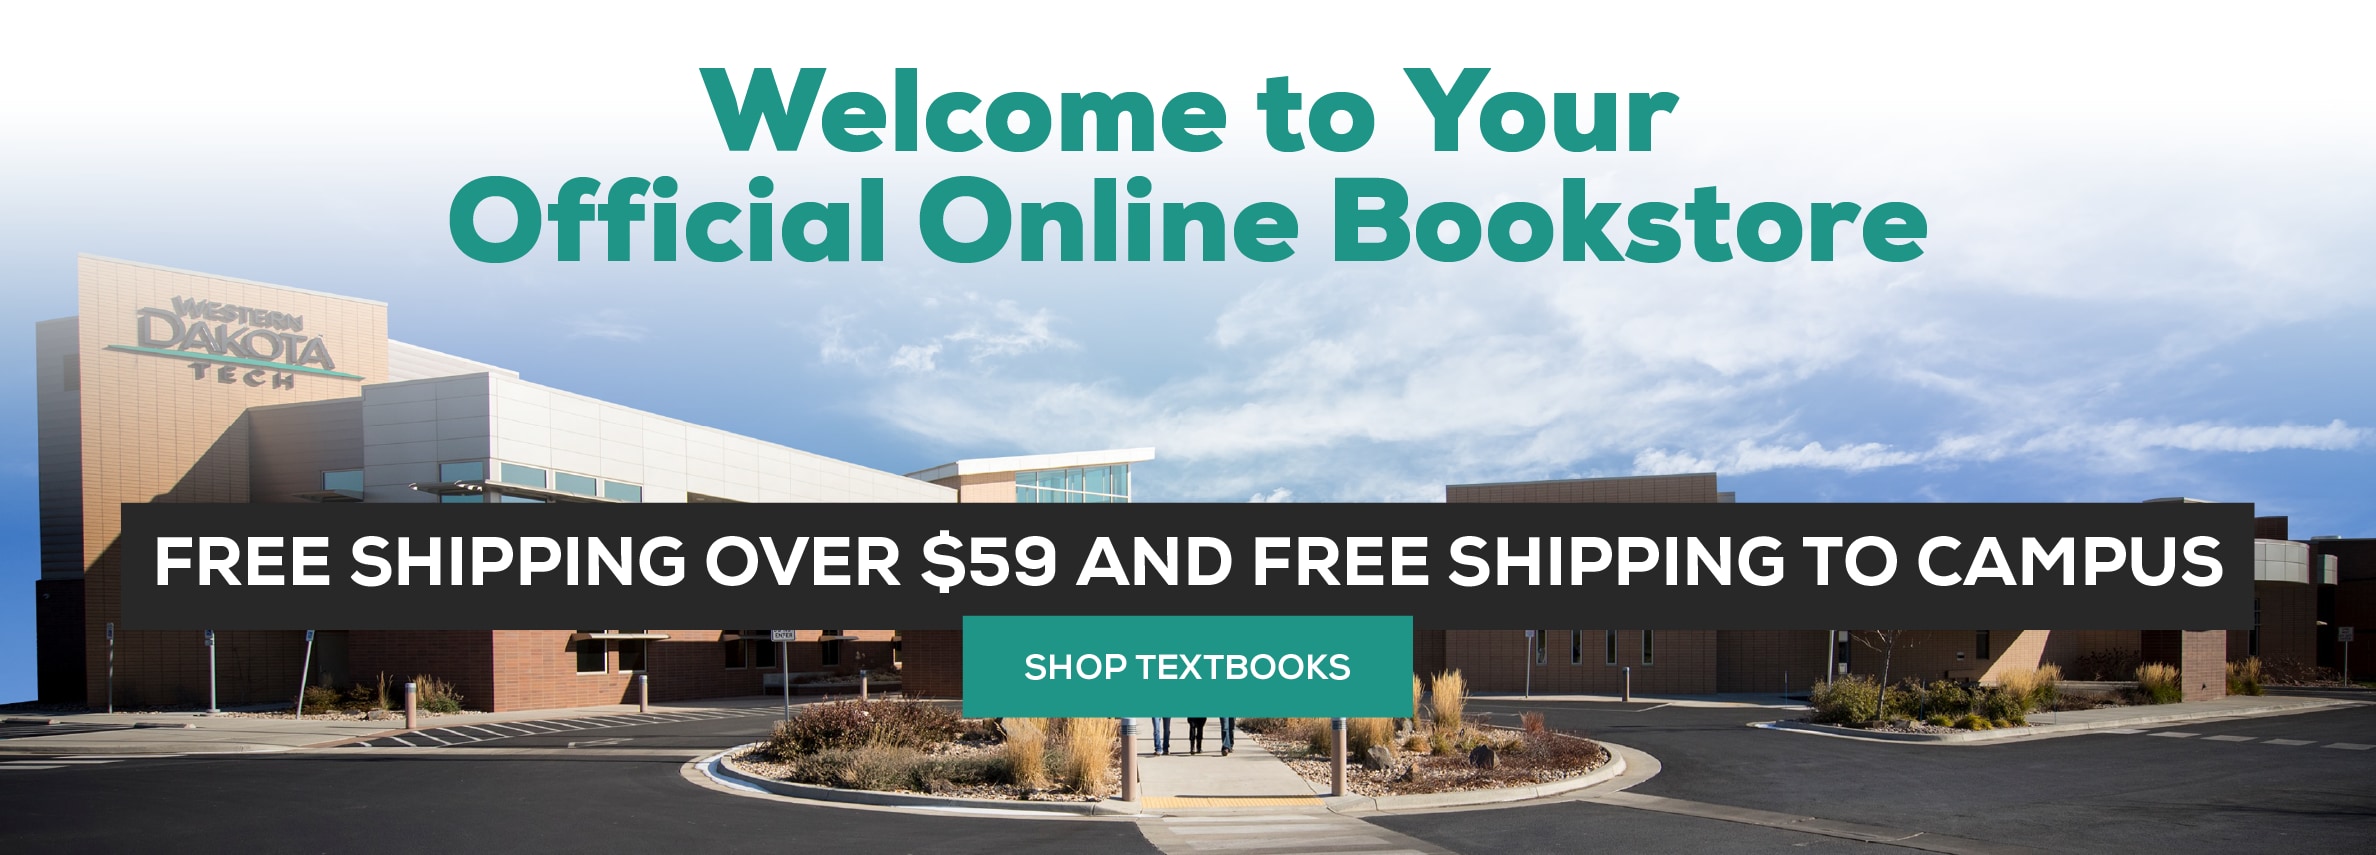 Welcome your official online bookstore! Free shipping over $59 and Free Shipping to Campus